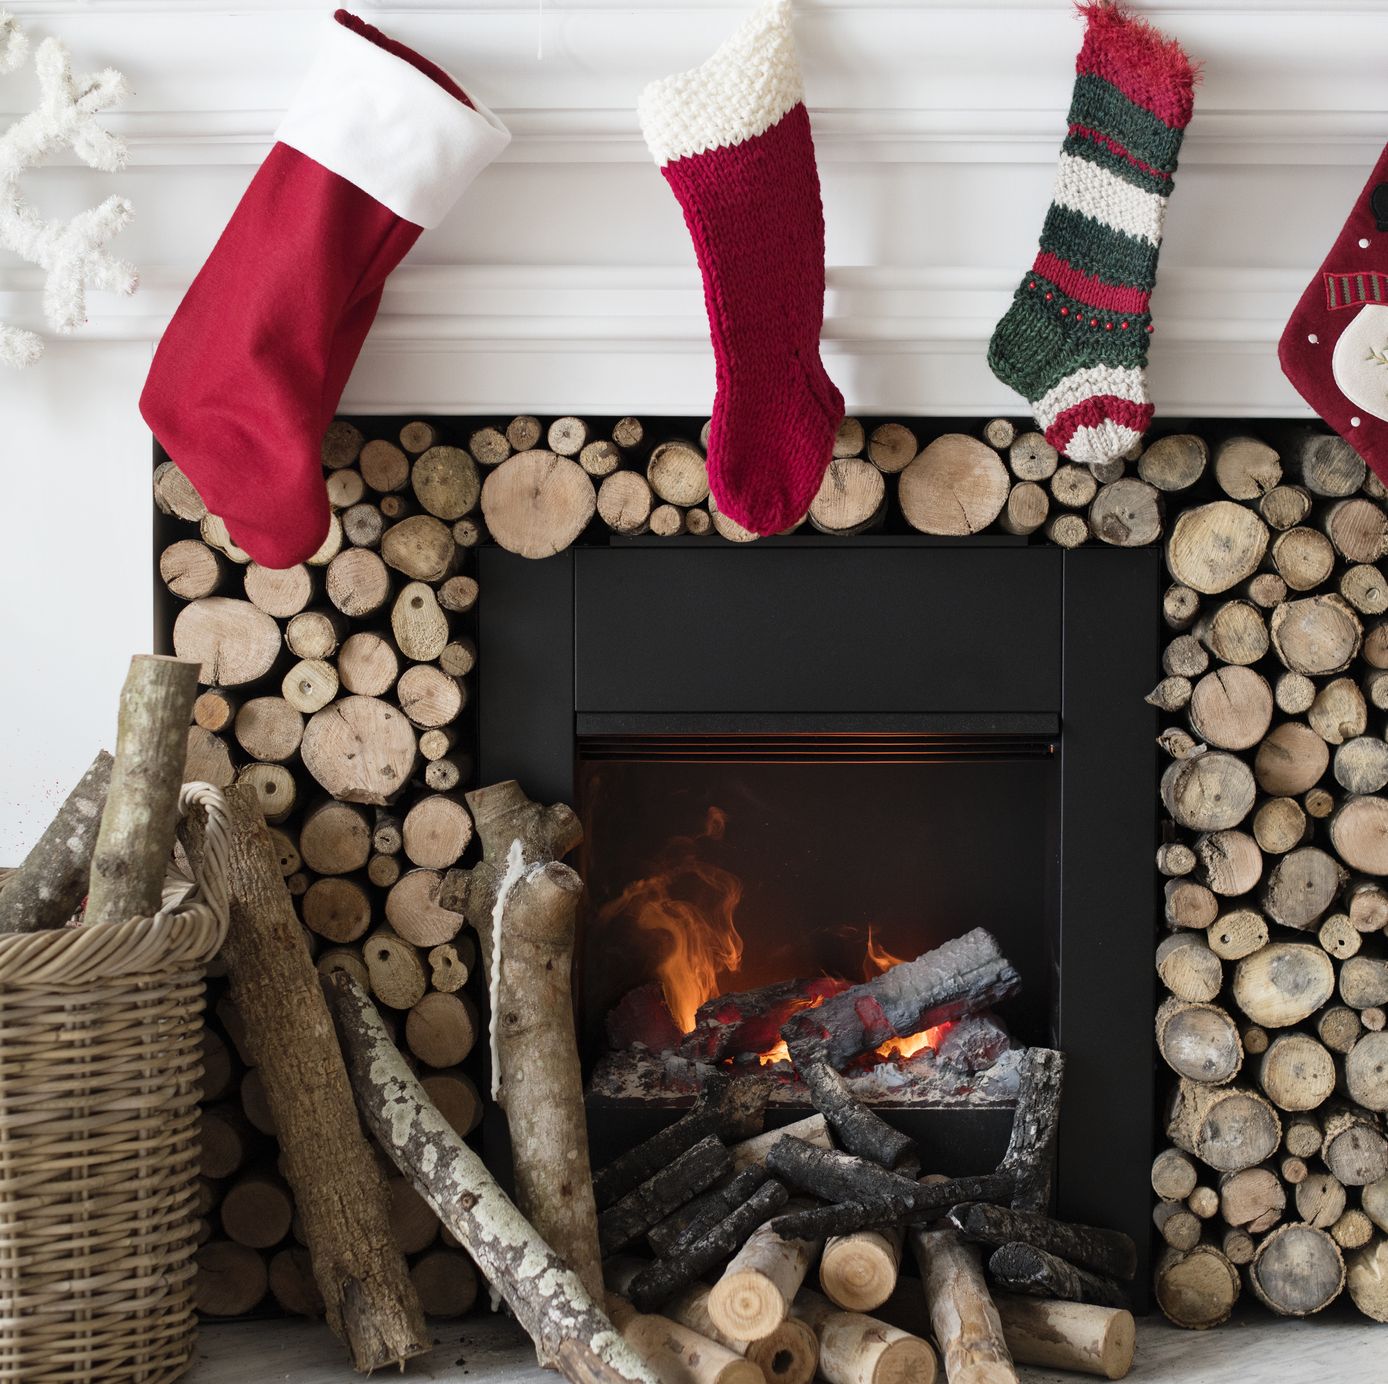 Top 10 Most Popular Christmas Stocking Fillers